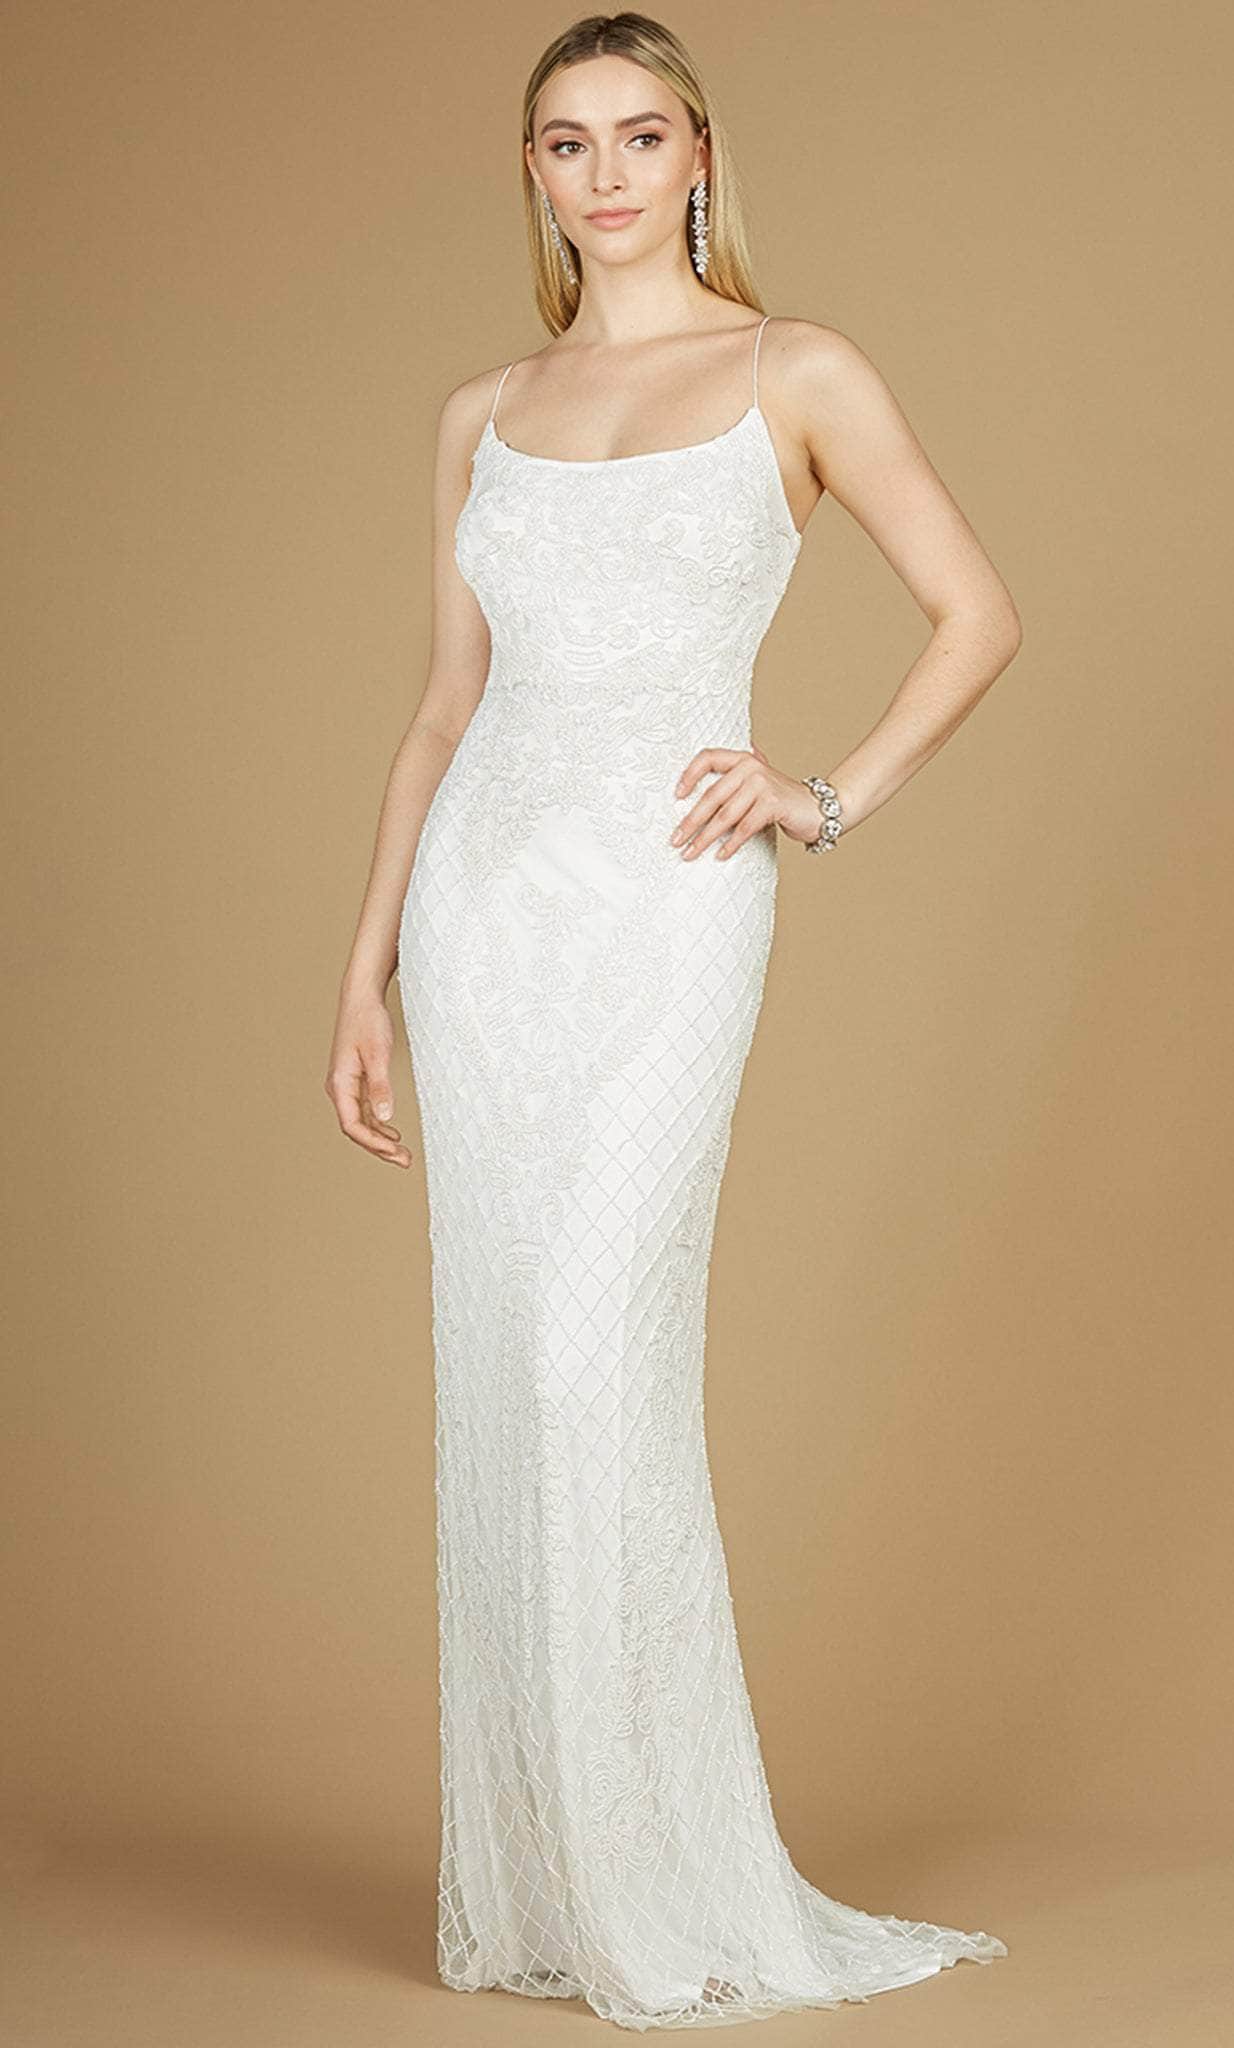 Lara Dresses 51113 - Lace Embroidered Scoop Bridal Gown
